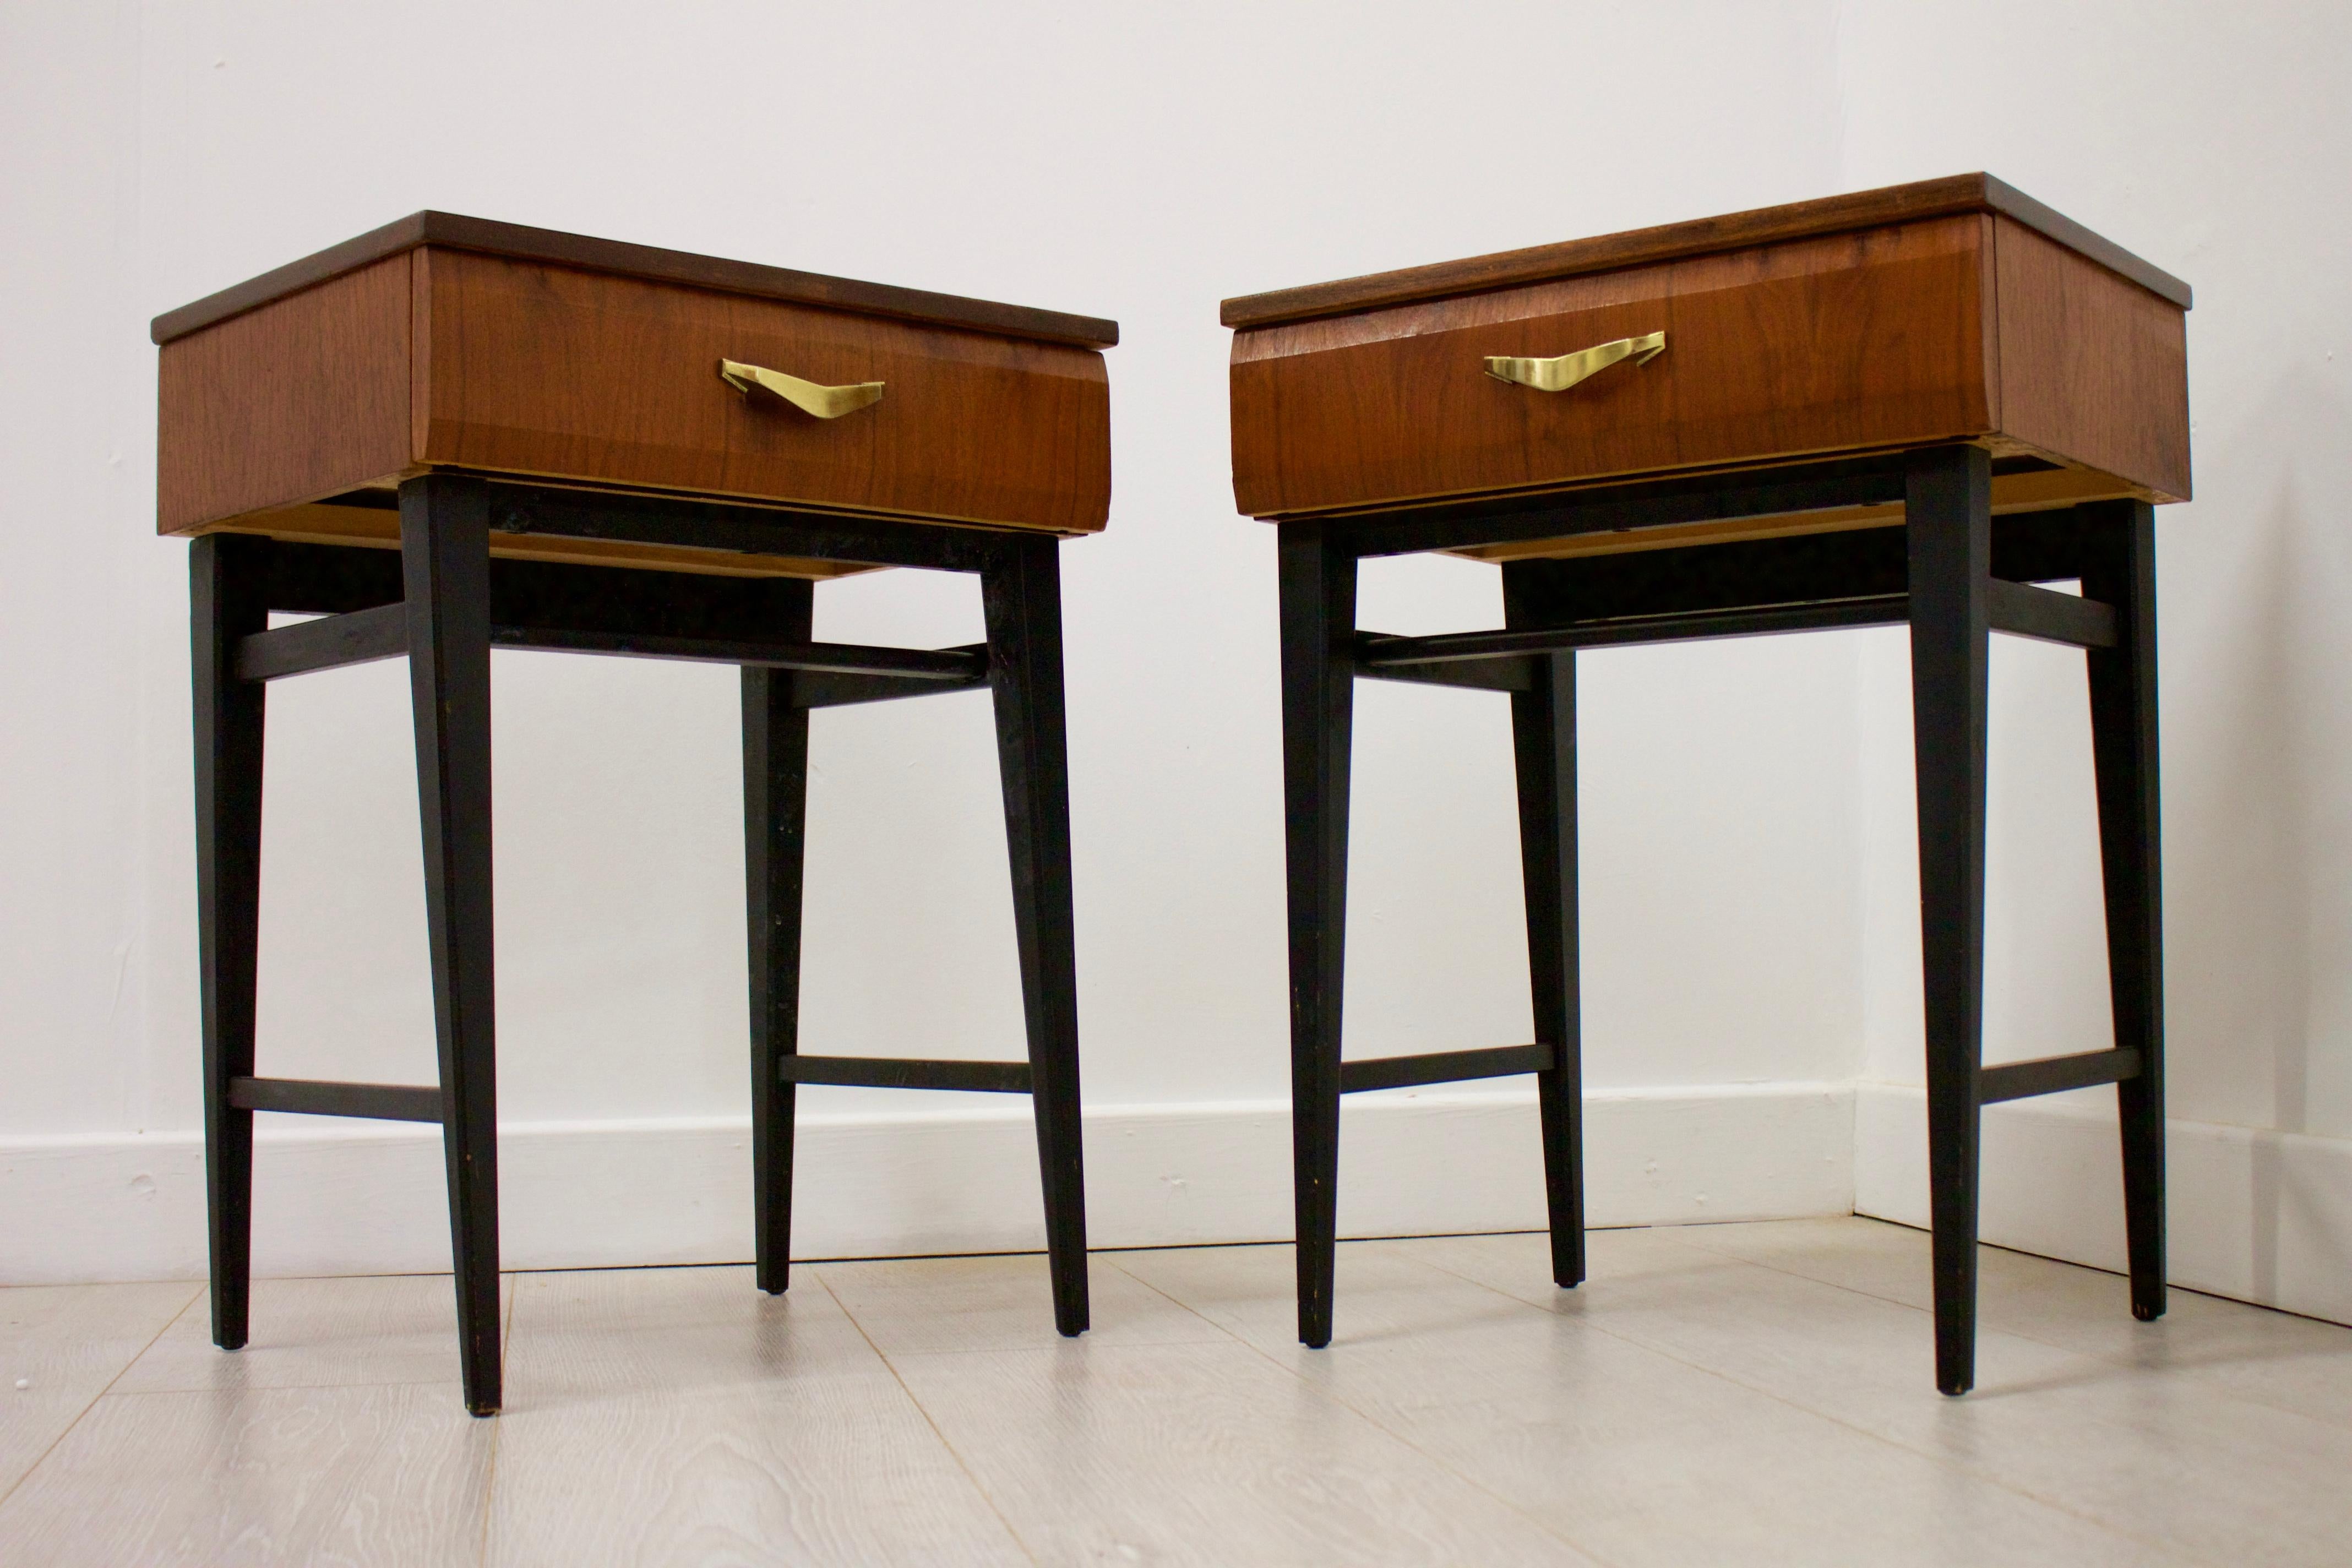 - This is a pair of Italian influenced midcentury bedside cabinet / tables.
- Made in the UK by Meredew
- Made from walnut veneer.